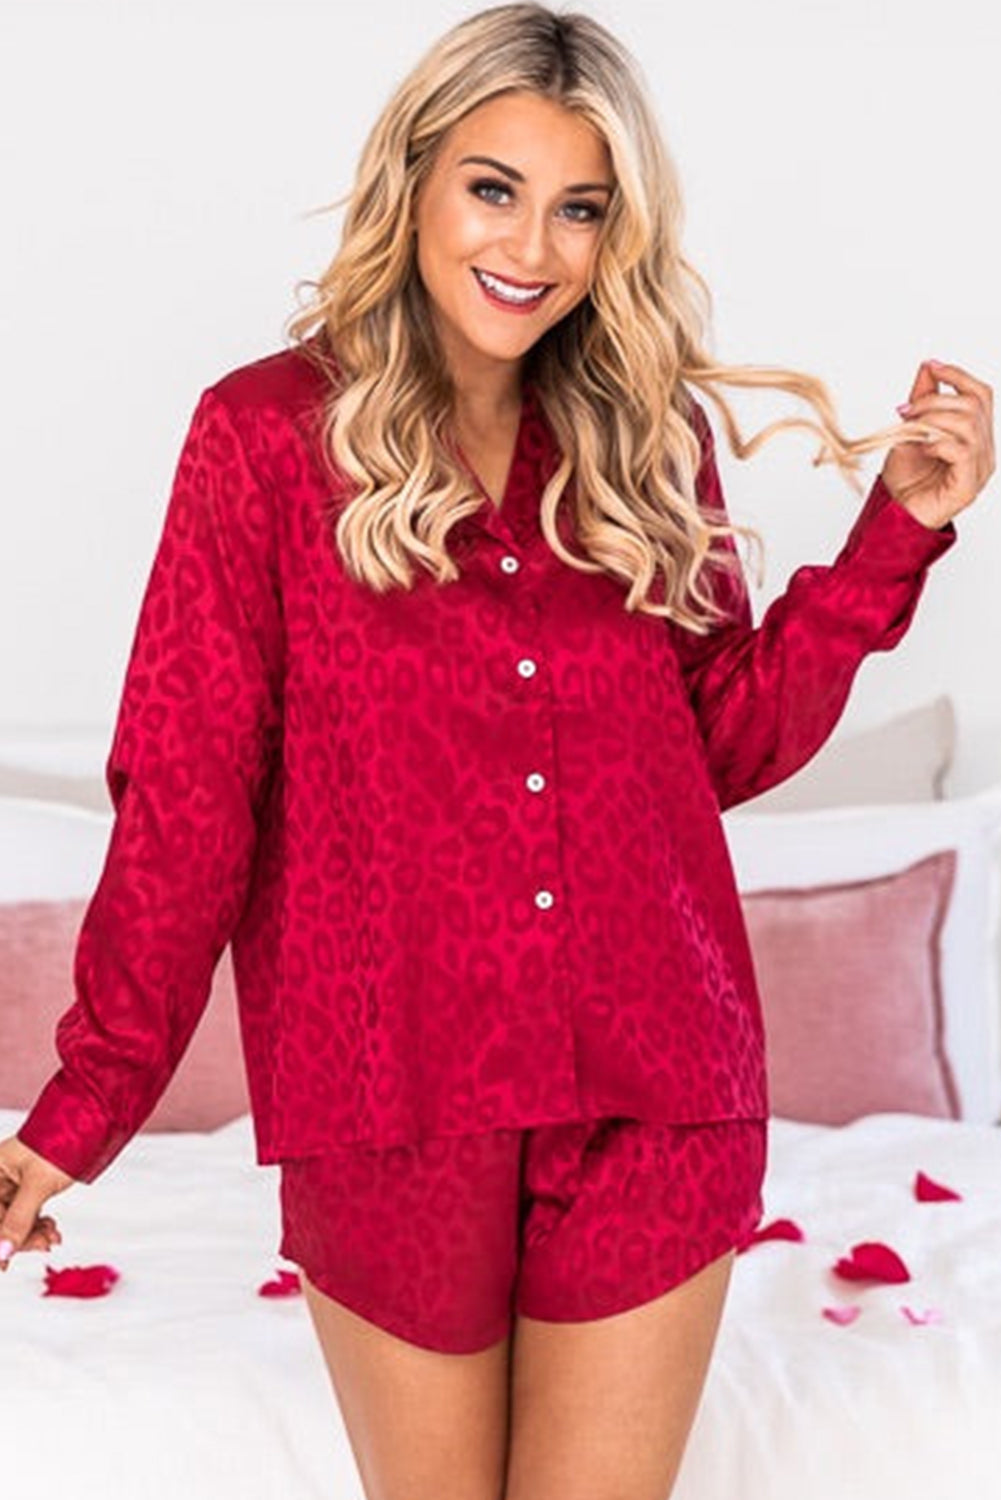 LC15343-3-S, LC15343-3-M, LC15343-3-L, LC15343-3-XL, Red Women's Satin Leopard Long Sleeve Top and Shorts 2 Piece Lounge Set